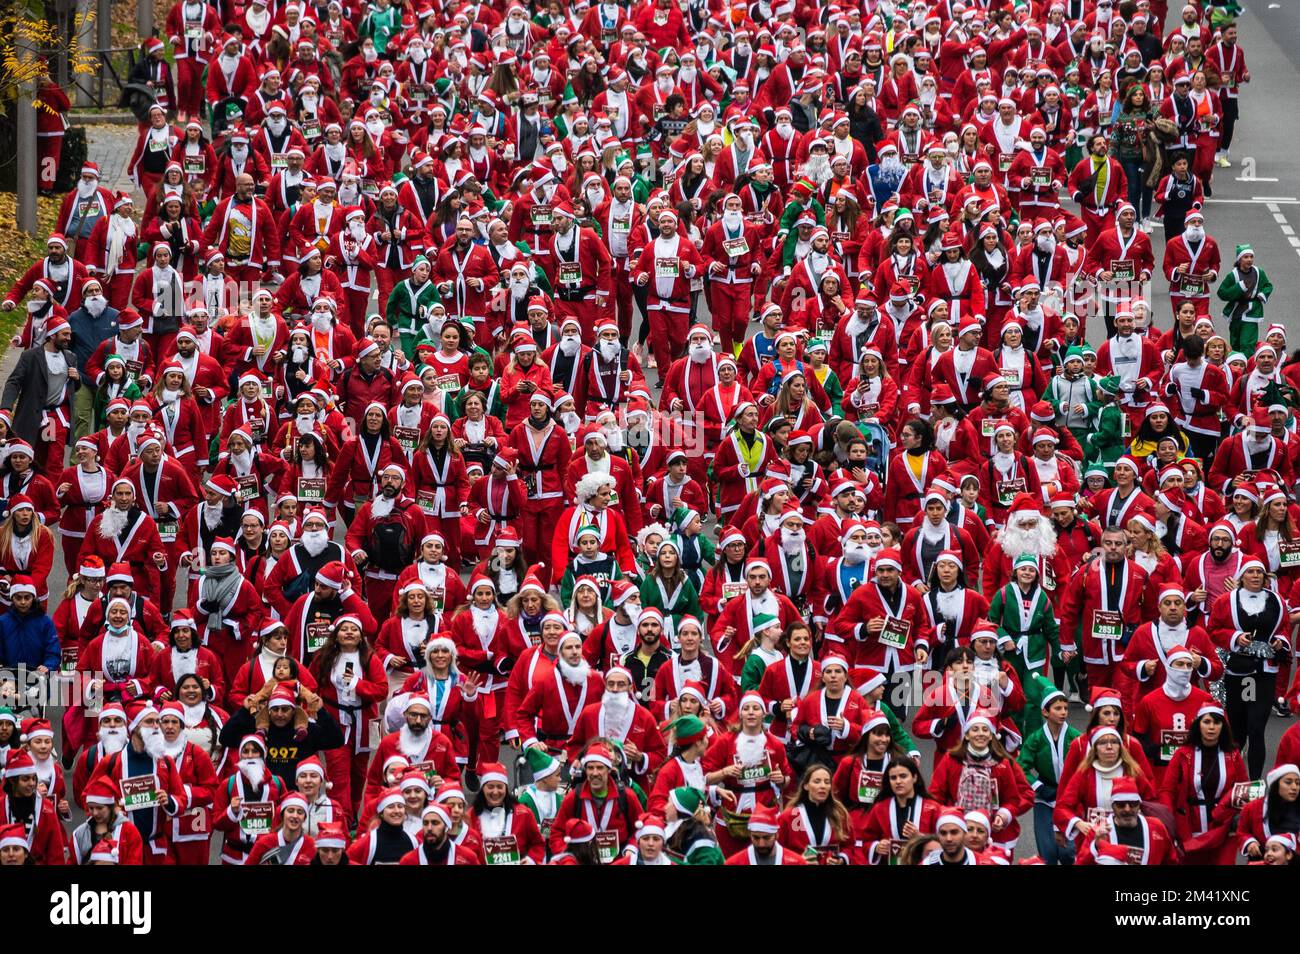 Madrid, Spain. 18th Dec, 2022. Thousands of people dressed as Santa Claus running during the traditional annual Santa Claus Christmas race. Credit: Marcos del Mazo/Alamy Live News Stock Photo